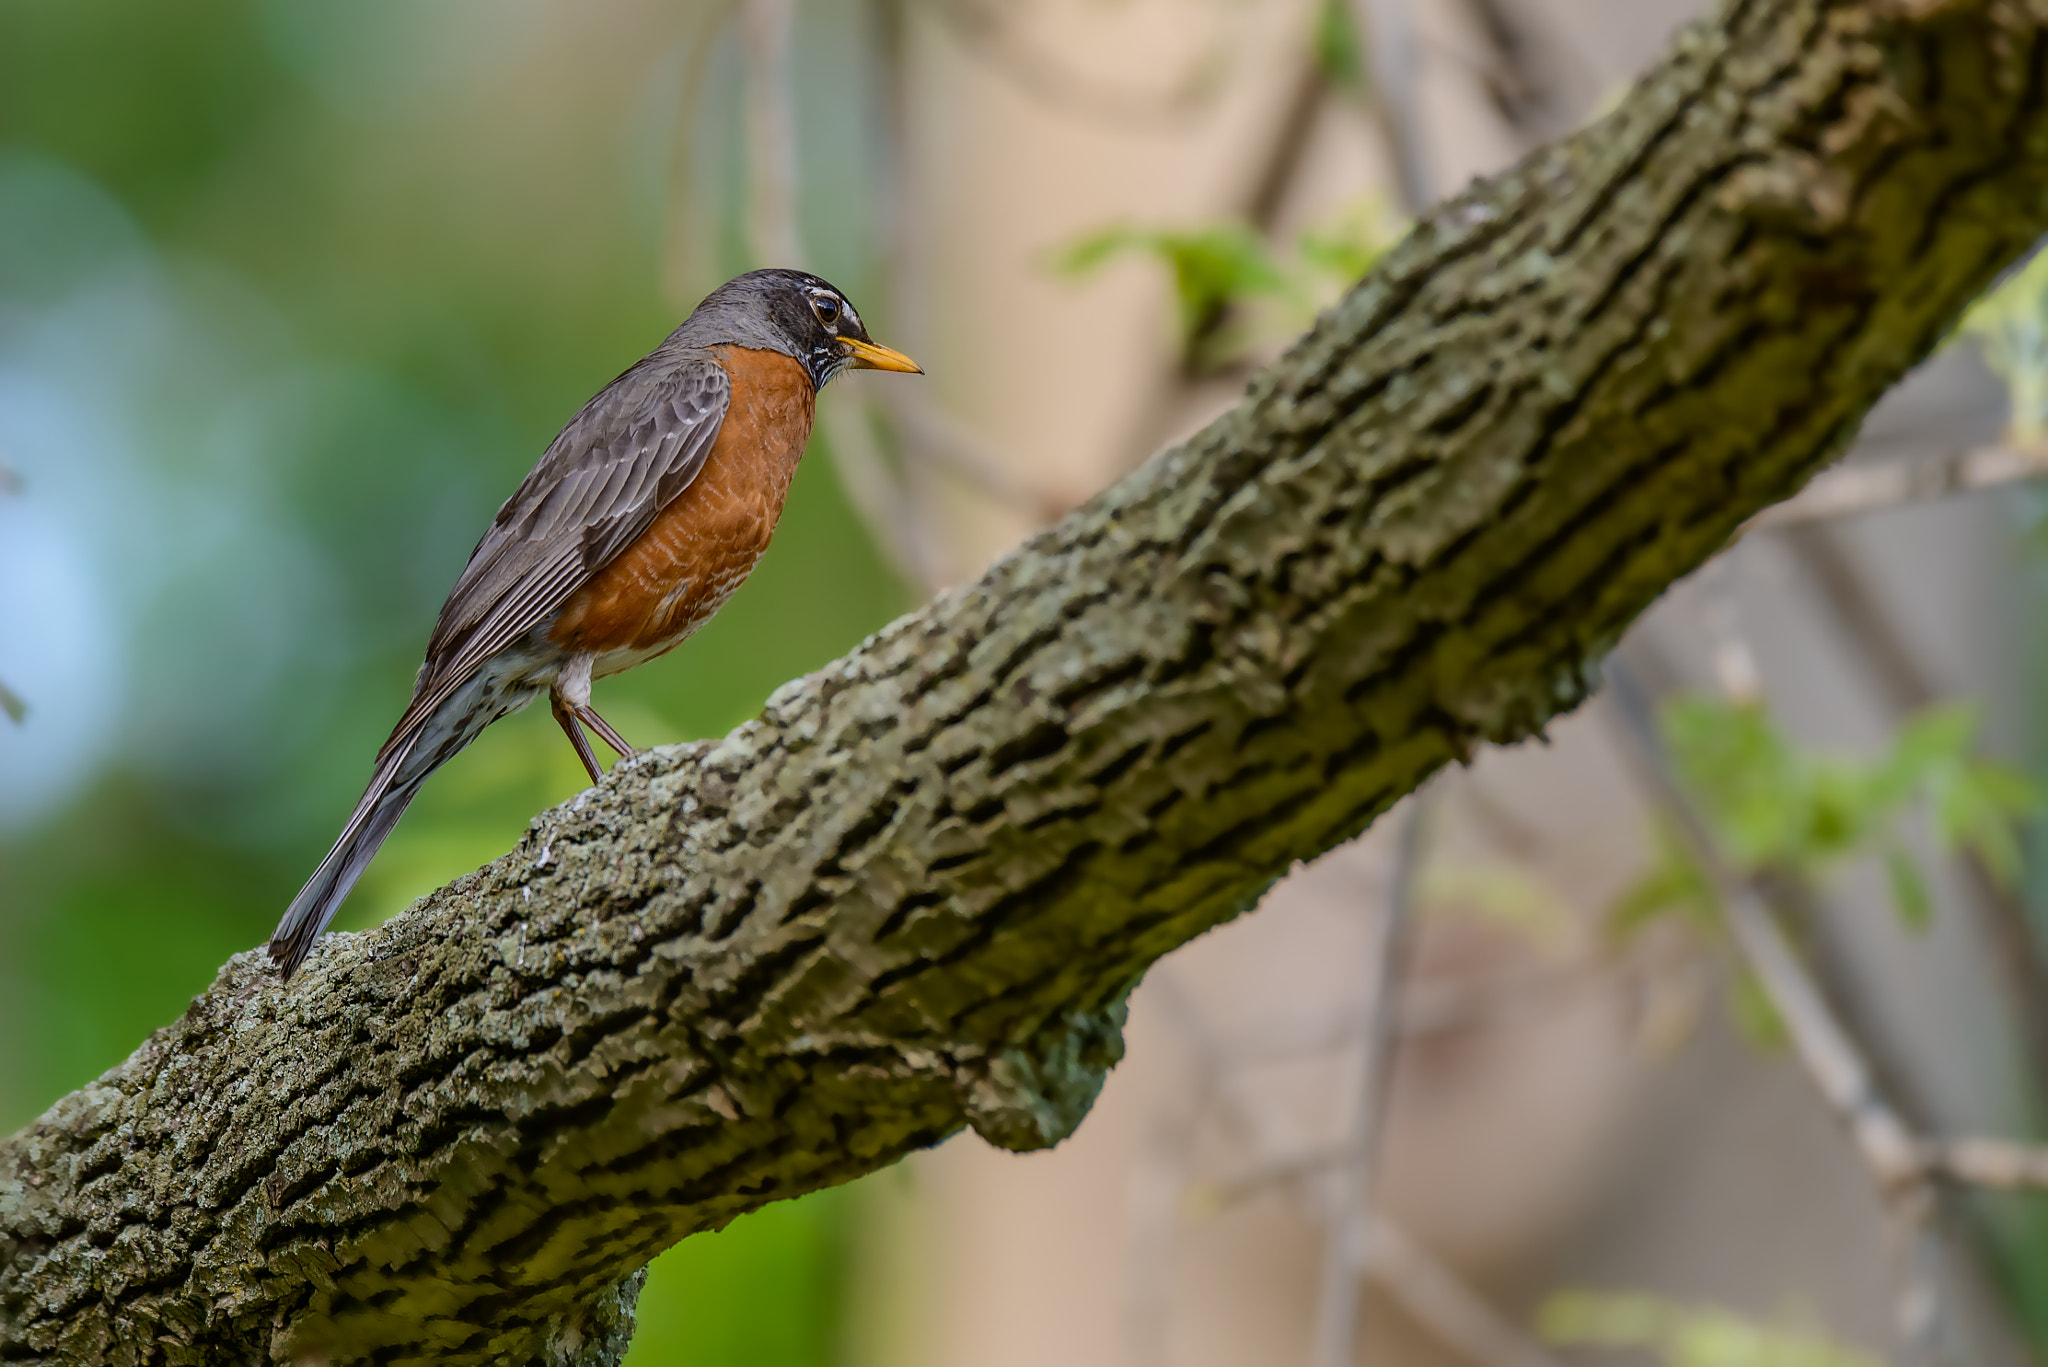 Nikon D800 sample photo. An american robin (turdus migratorius) perched in a tree. photography